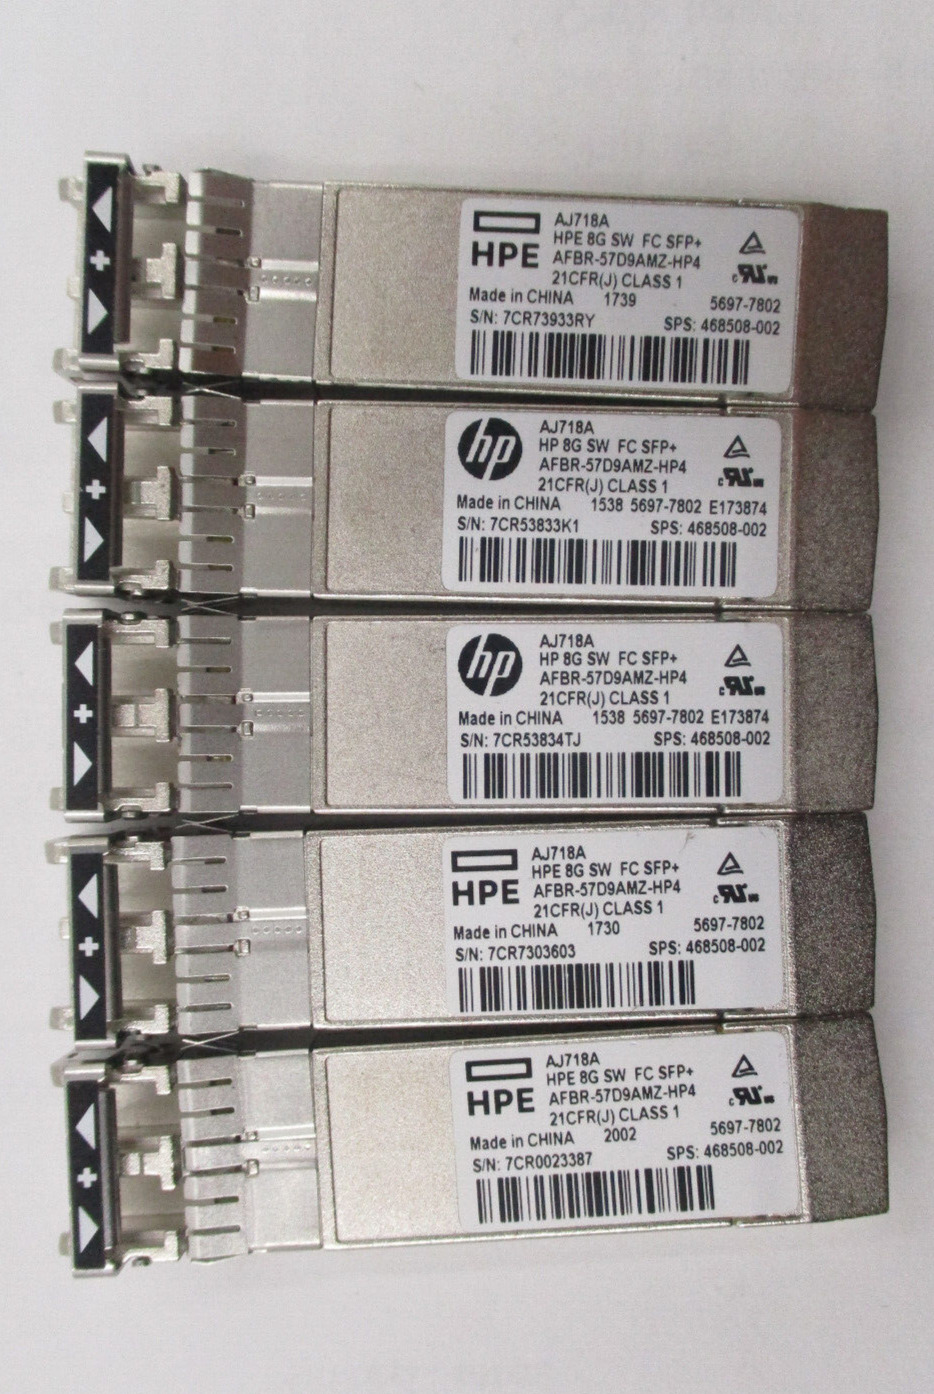 Lot of 5 HP AJ718A 8GB Short Wave FC SFP+ HP P/N: 468508-002 Tested Working